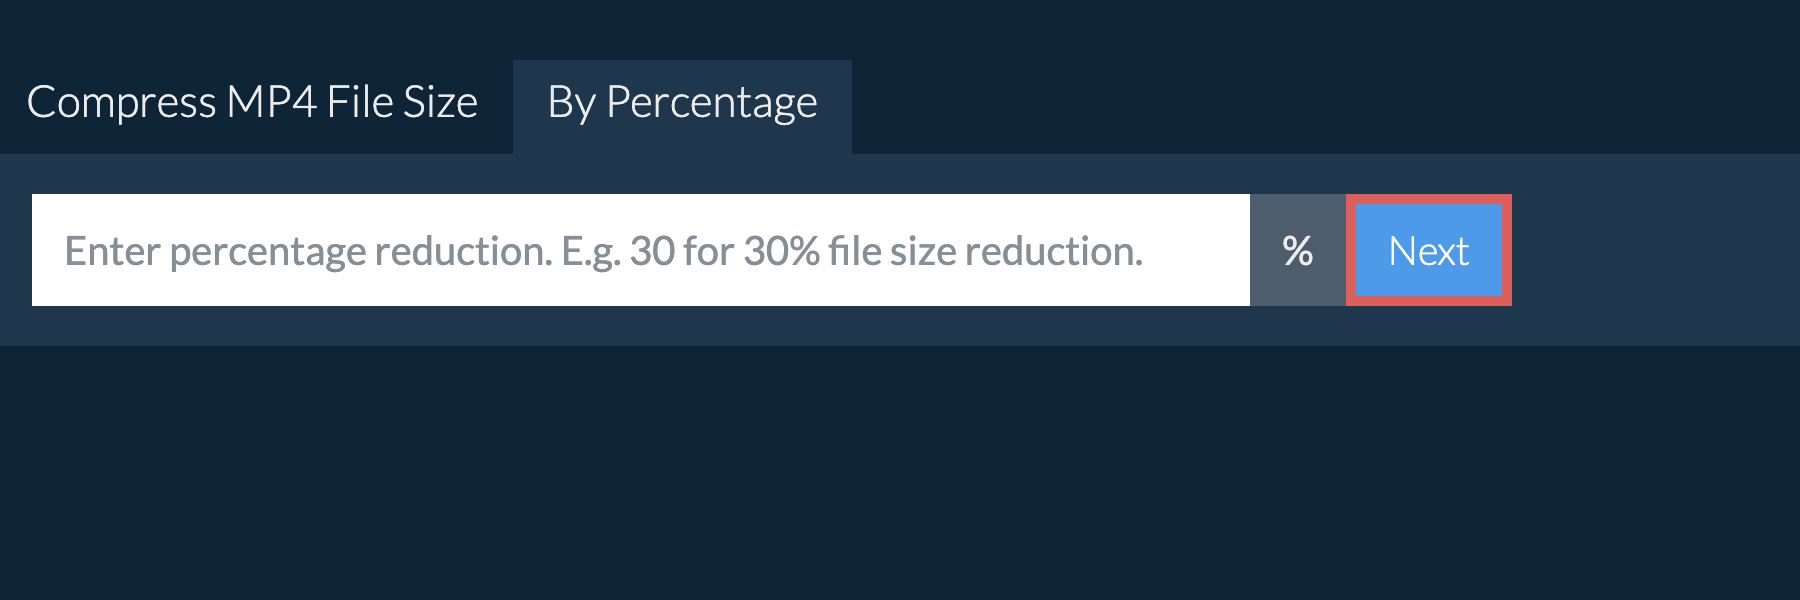 Reduce mp4 By Percentage